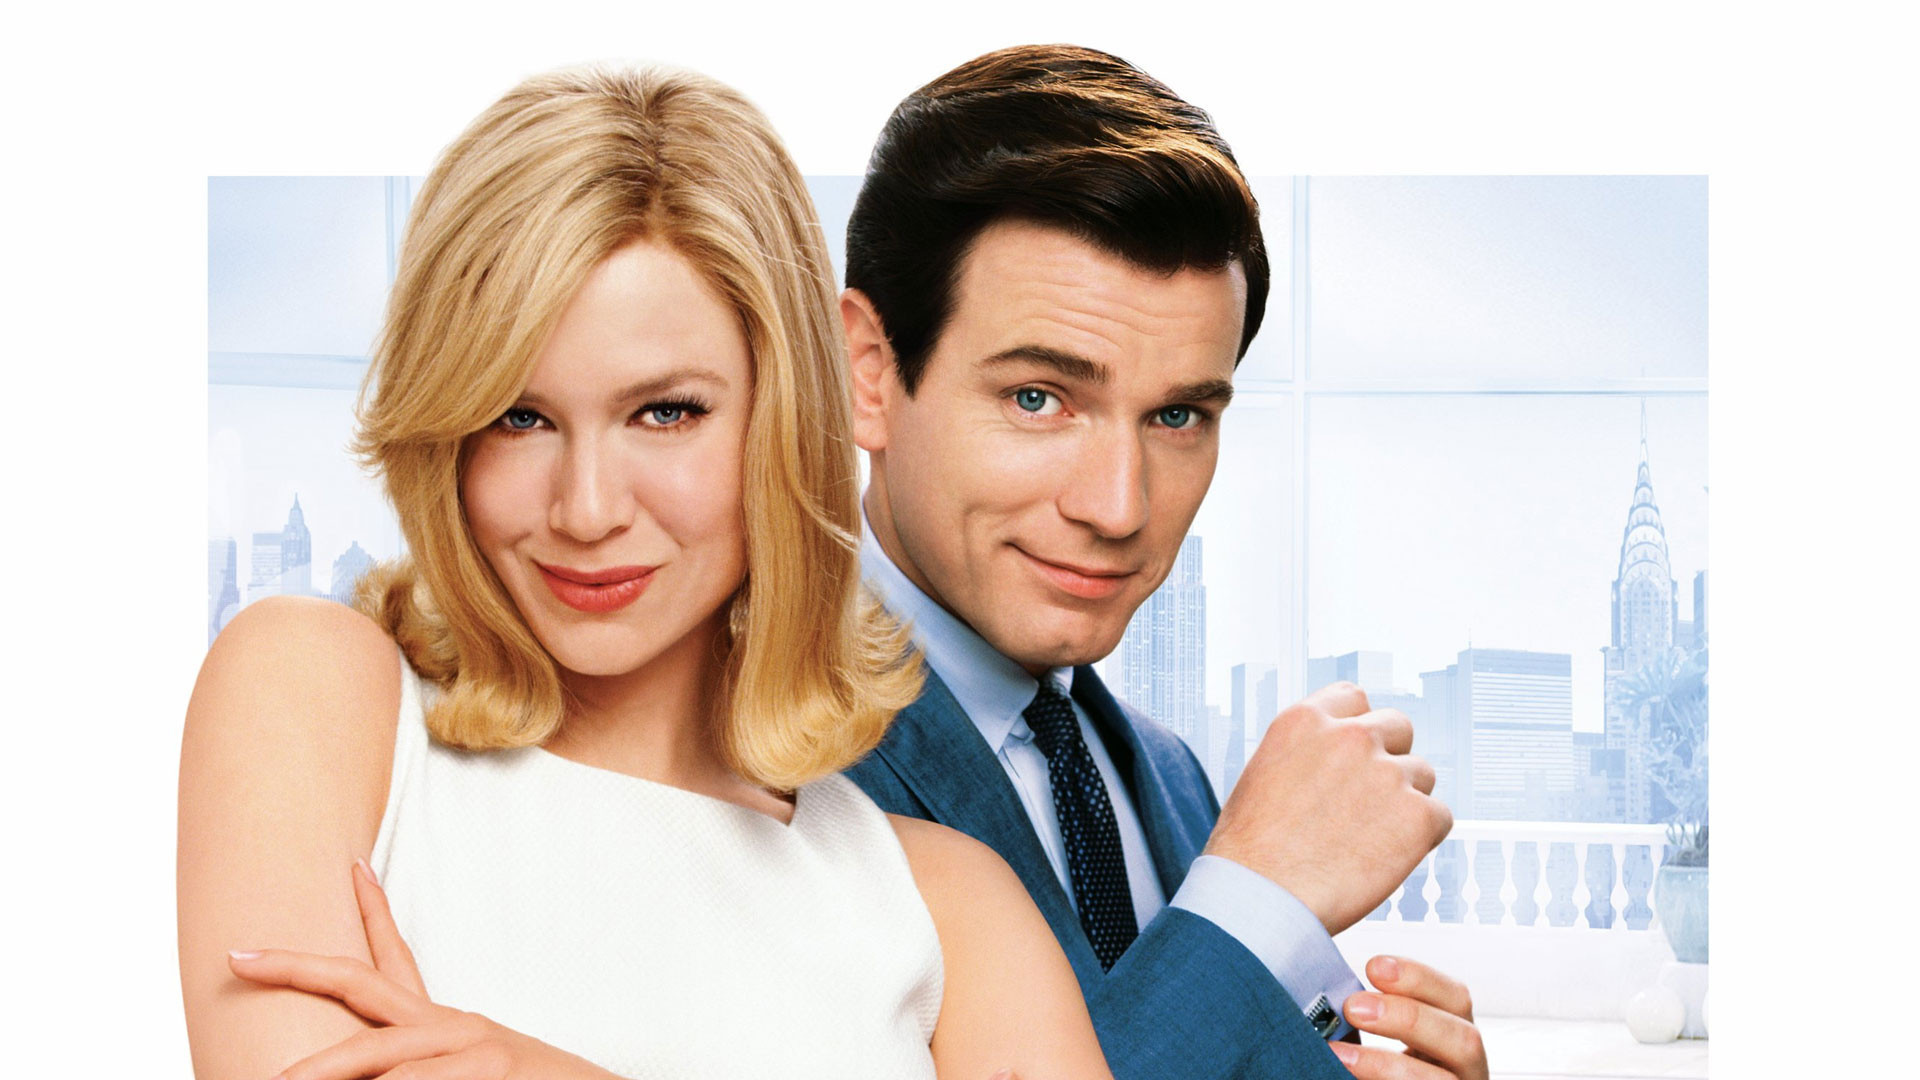 2003 Down With Love